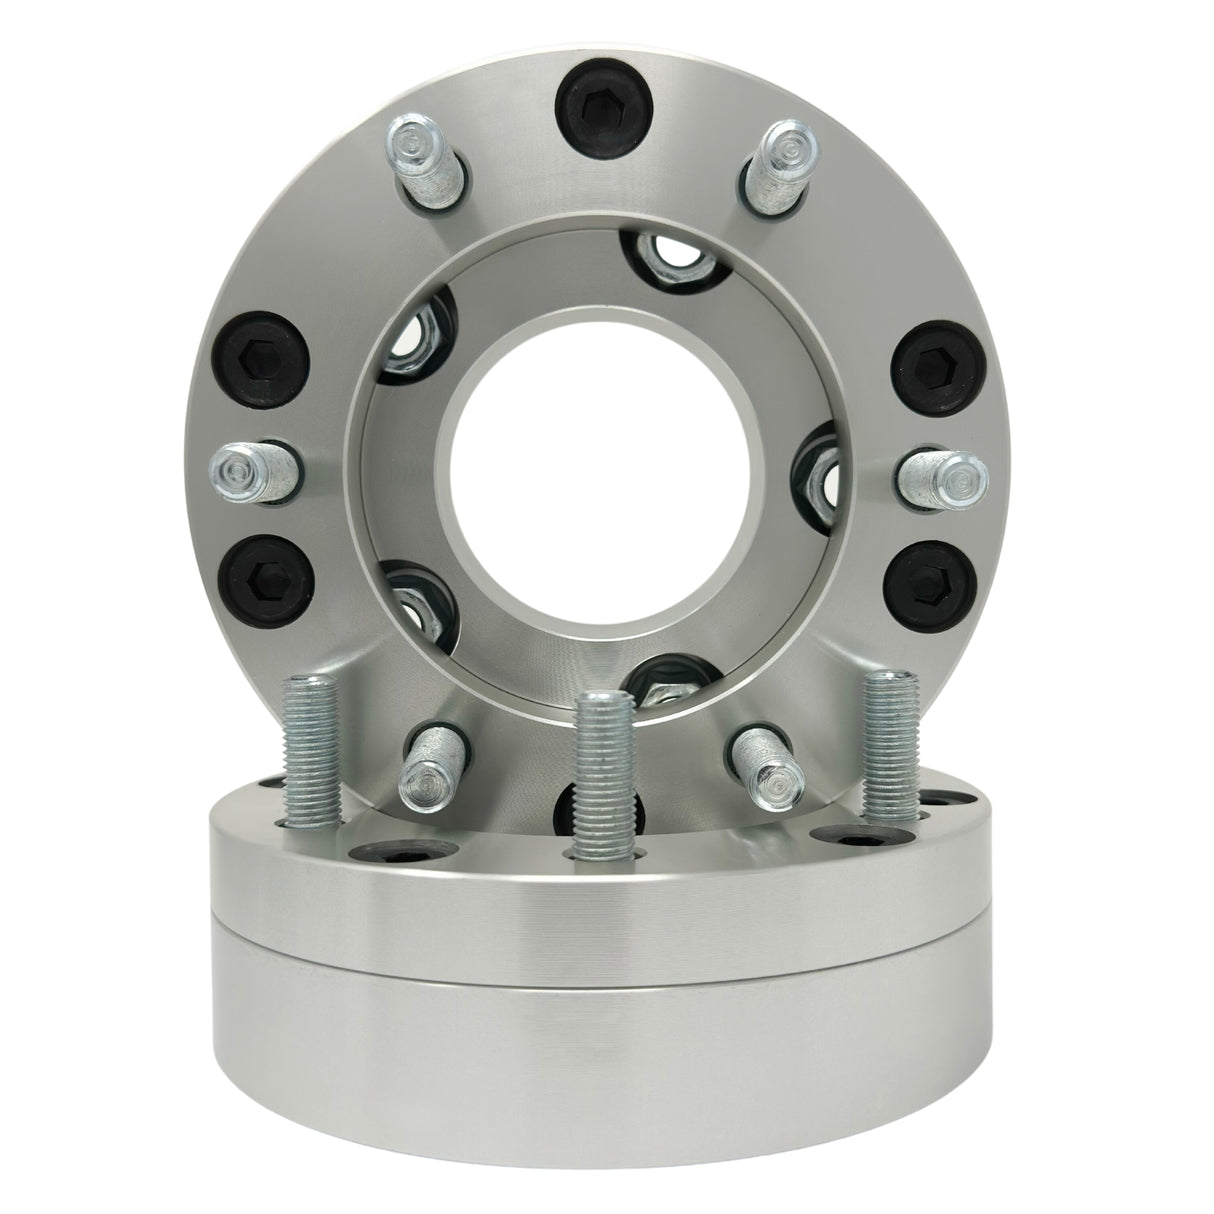 5x4.5 to 6x5.5 2-Piece Wheel Adapter 2” Inch (50mm) 12x1.5 Studs & Lug Nuts 74mm Center Bore | 5x114.3 to 6x139.7